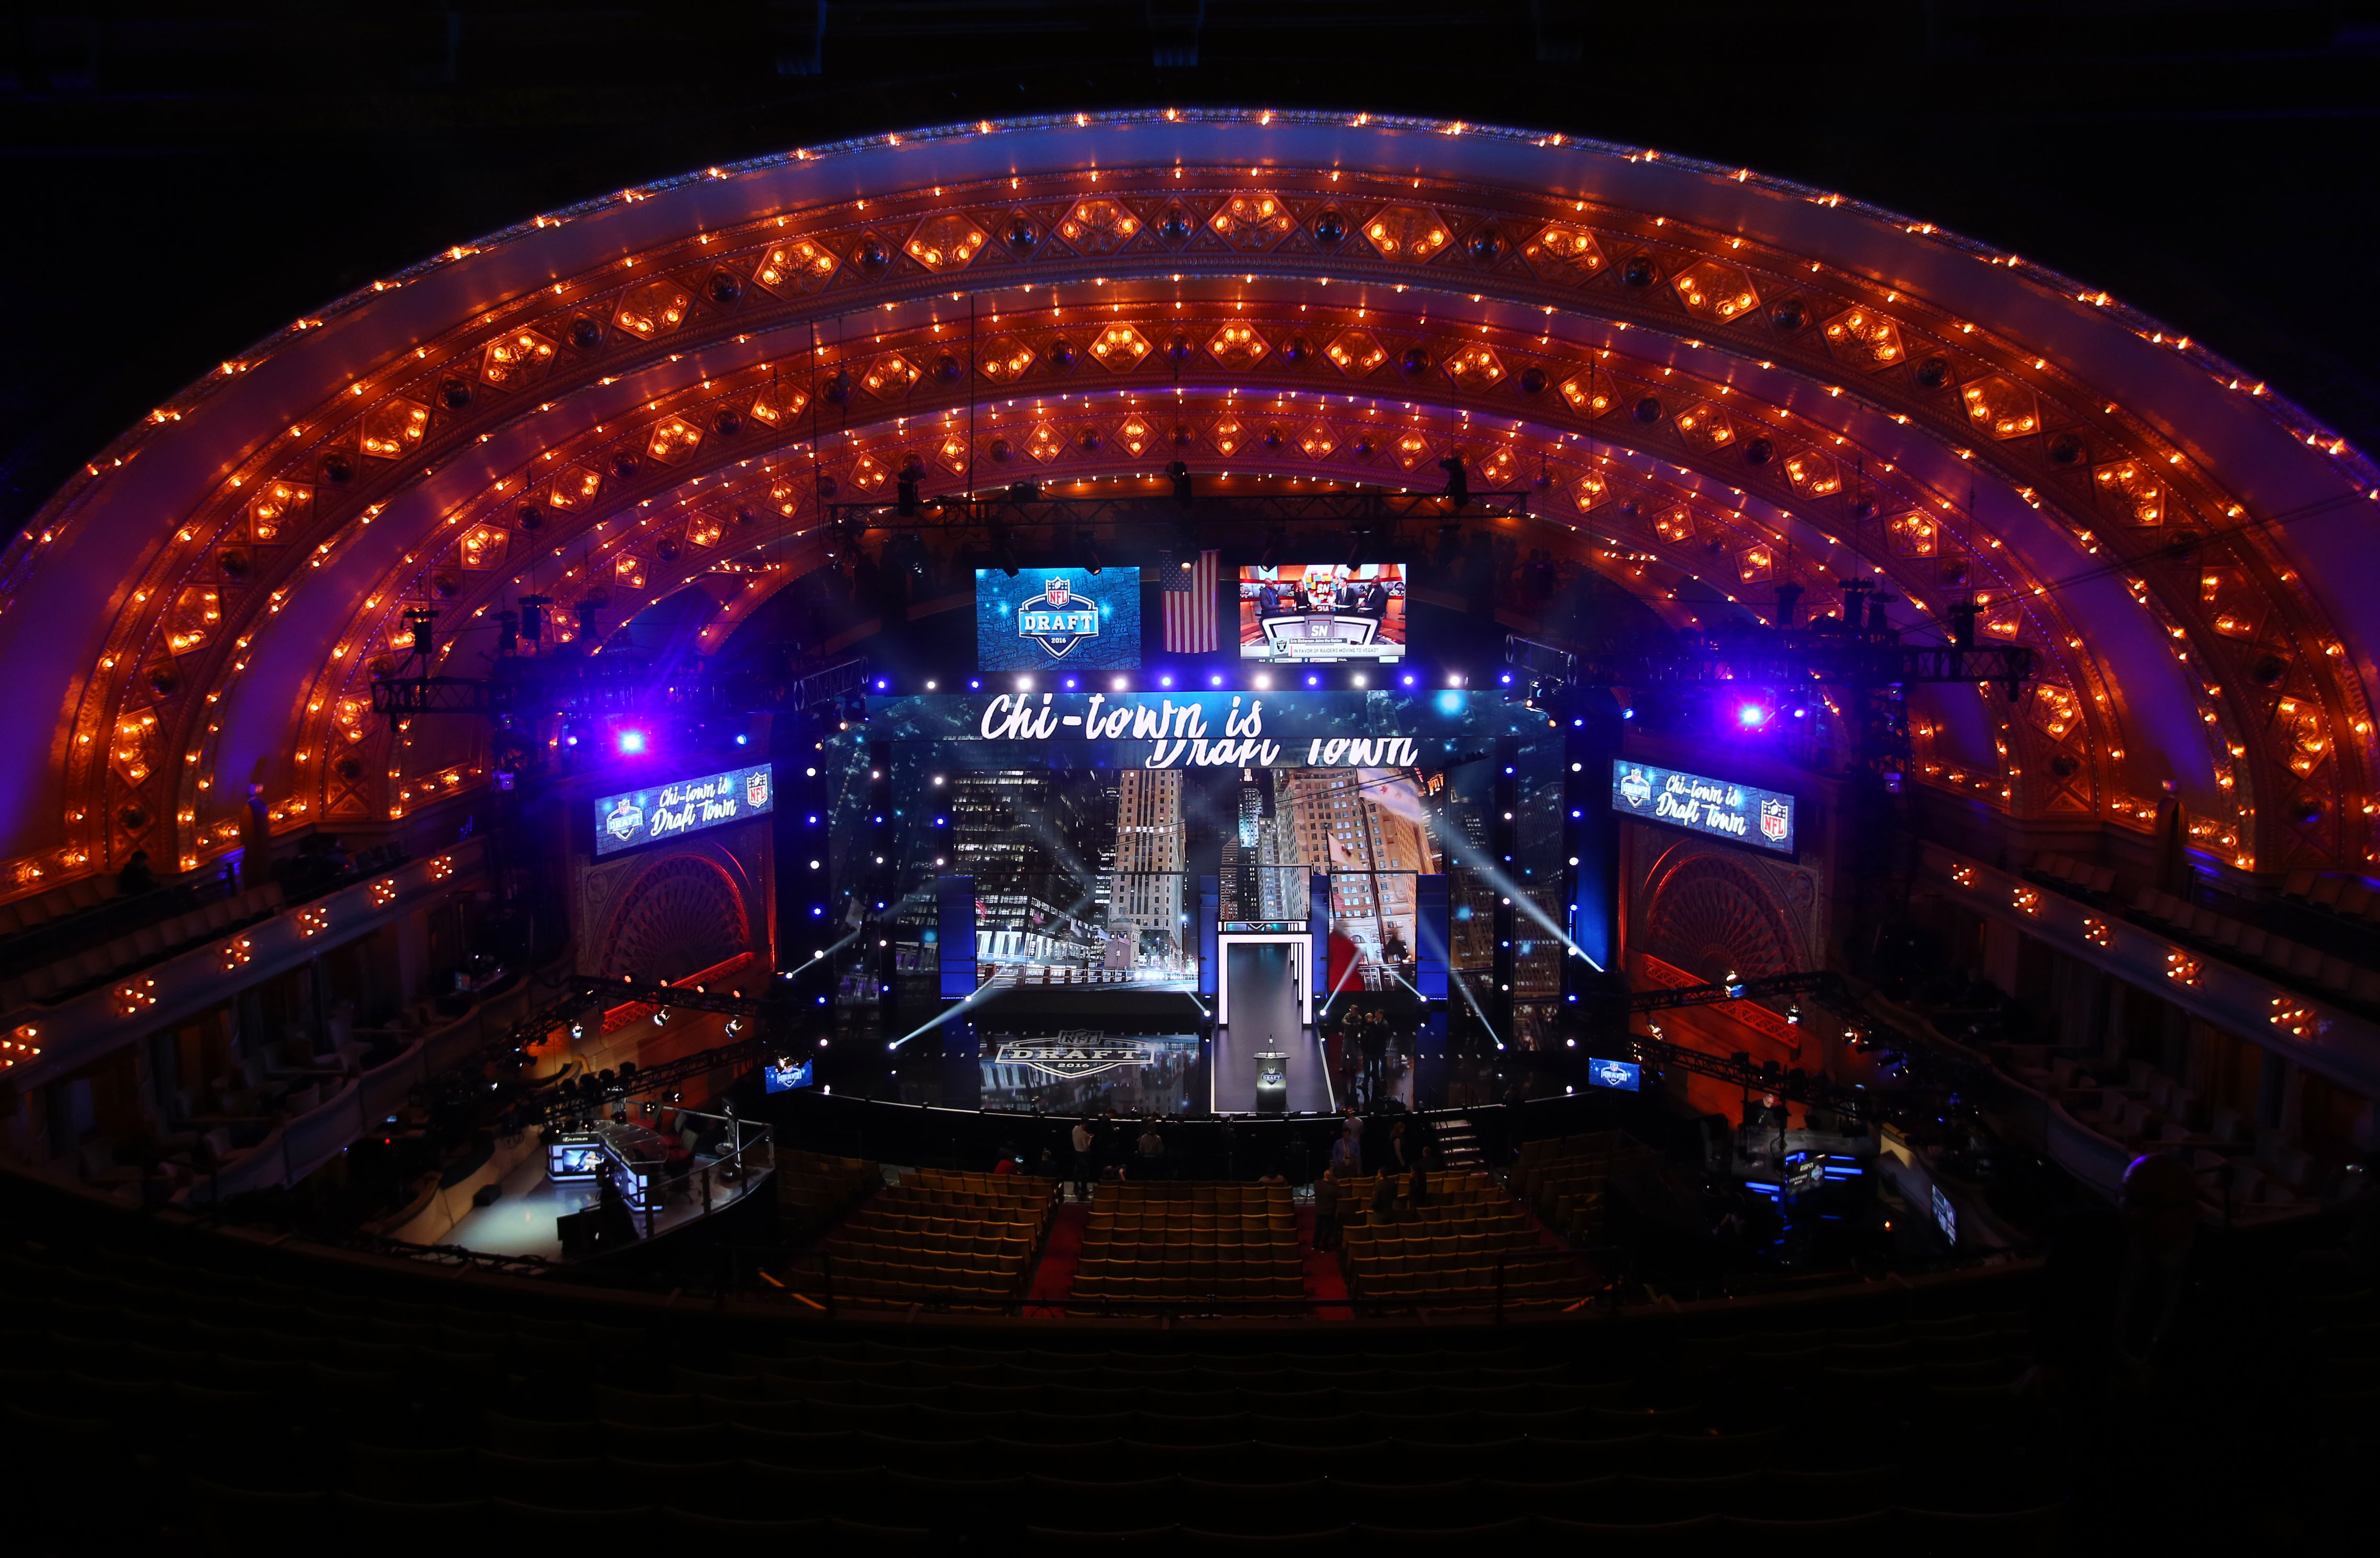 The 2016 NFL Draft stage